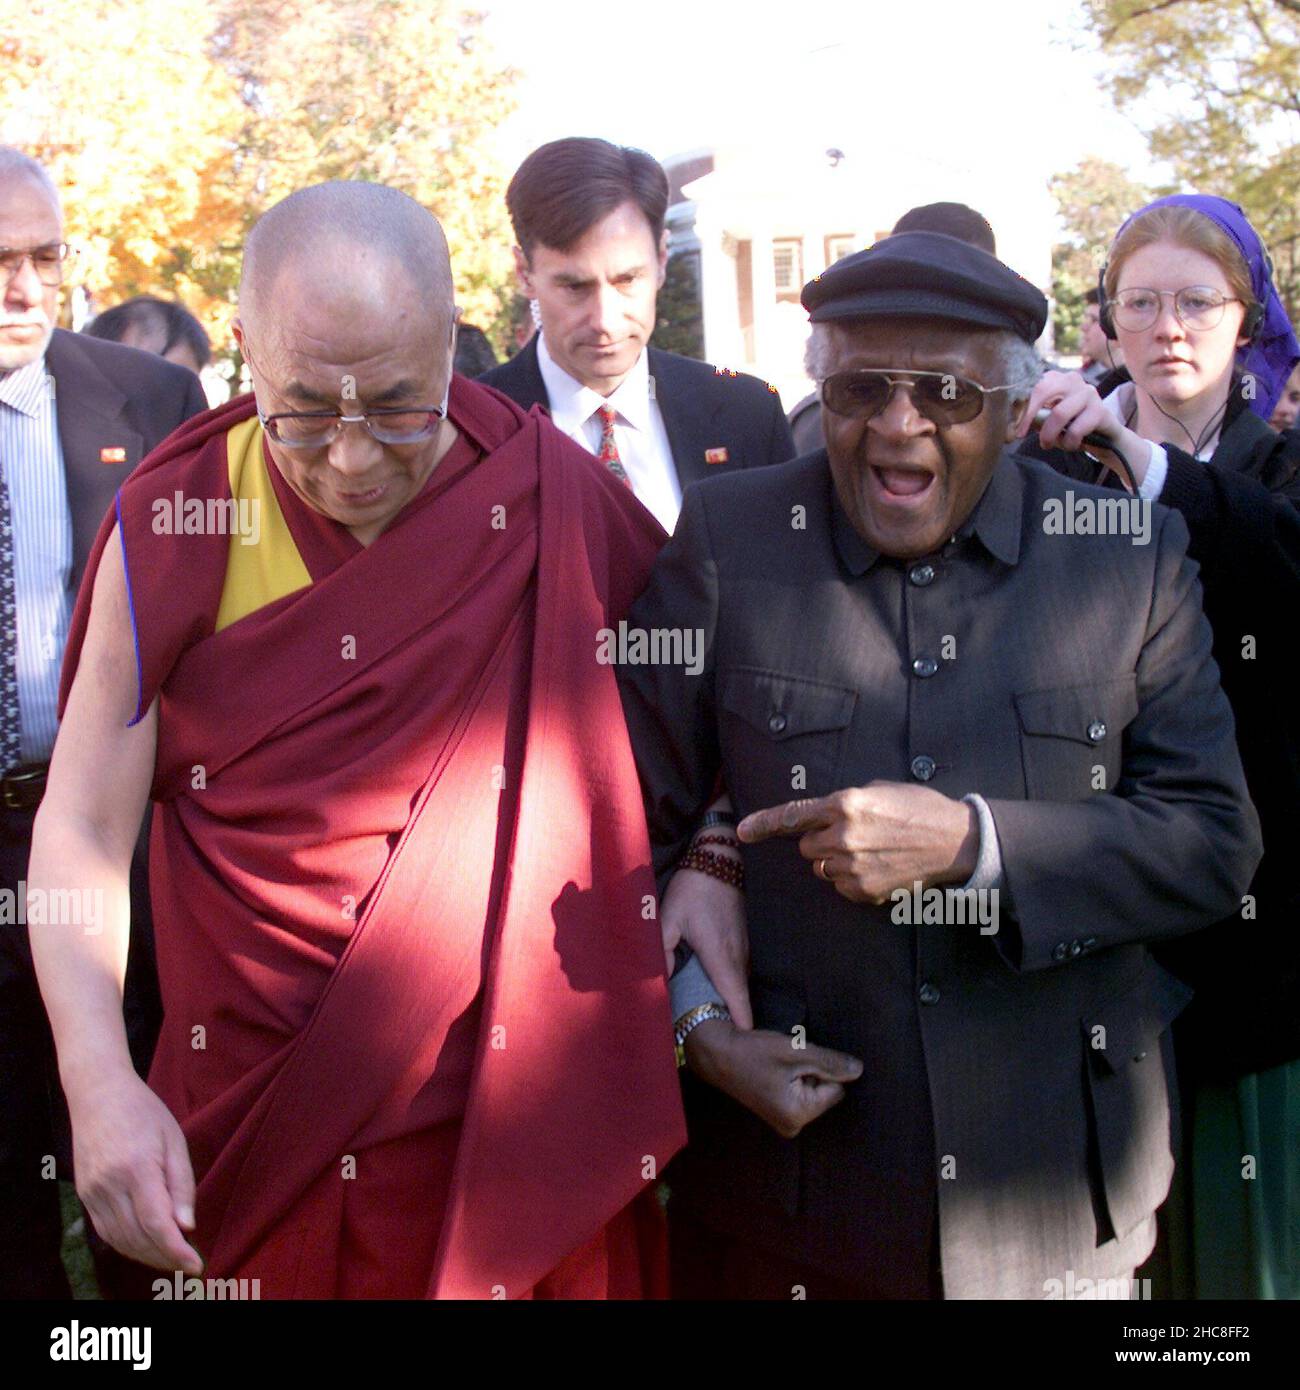 KRT US NEWS STORY SLUGGED: NOBEL KRT PHOTOGRAPH BY CHUCK KENNEDY (KRT9) CHARLOTTESVILLE, VA., November 5, 1998 -- Archbishop Desmond Tutu, right, of South Africa and His Holiness, The Dalai Lama walk down the lawn at the University of Virginia where they are attending the University's Nobel Peace Laureates Conference Thursday. Eight Nobel peace laureates are gathering in the unprecedented conference that organizers hope will raise difficult questions in a time of multiple global conflicts. (Photo by KRT) AP PL BL KD 1998 (Sq.) (Additional photos available on KRT Direct, KRT/PressLink or upon Stock Photo